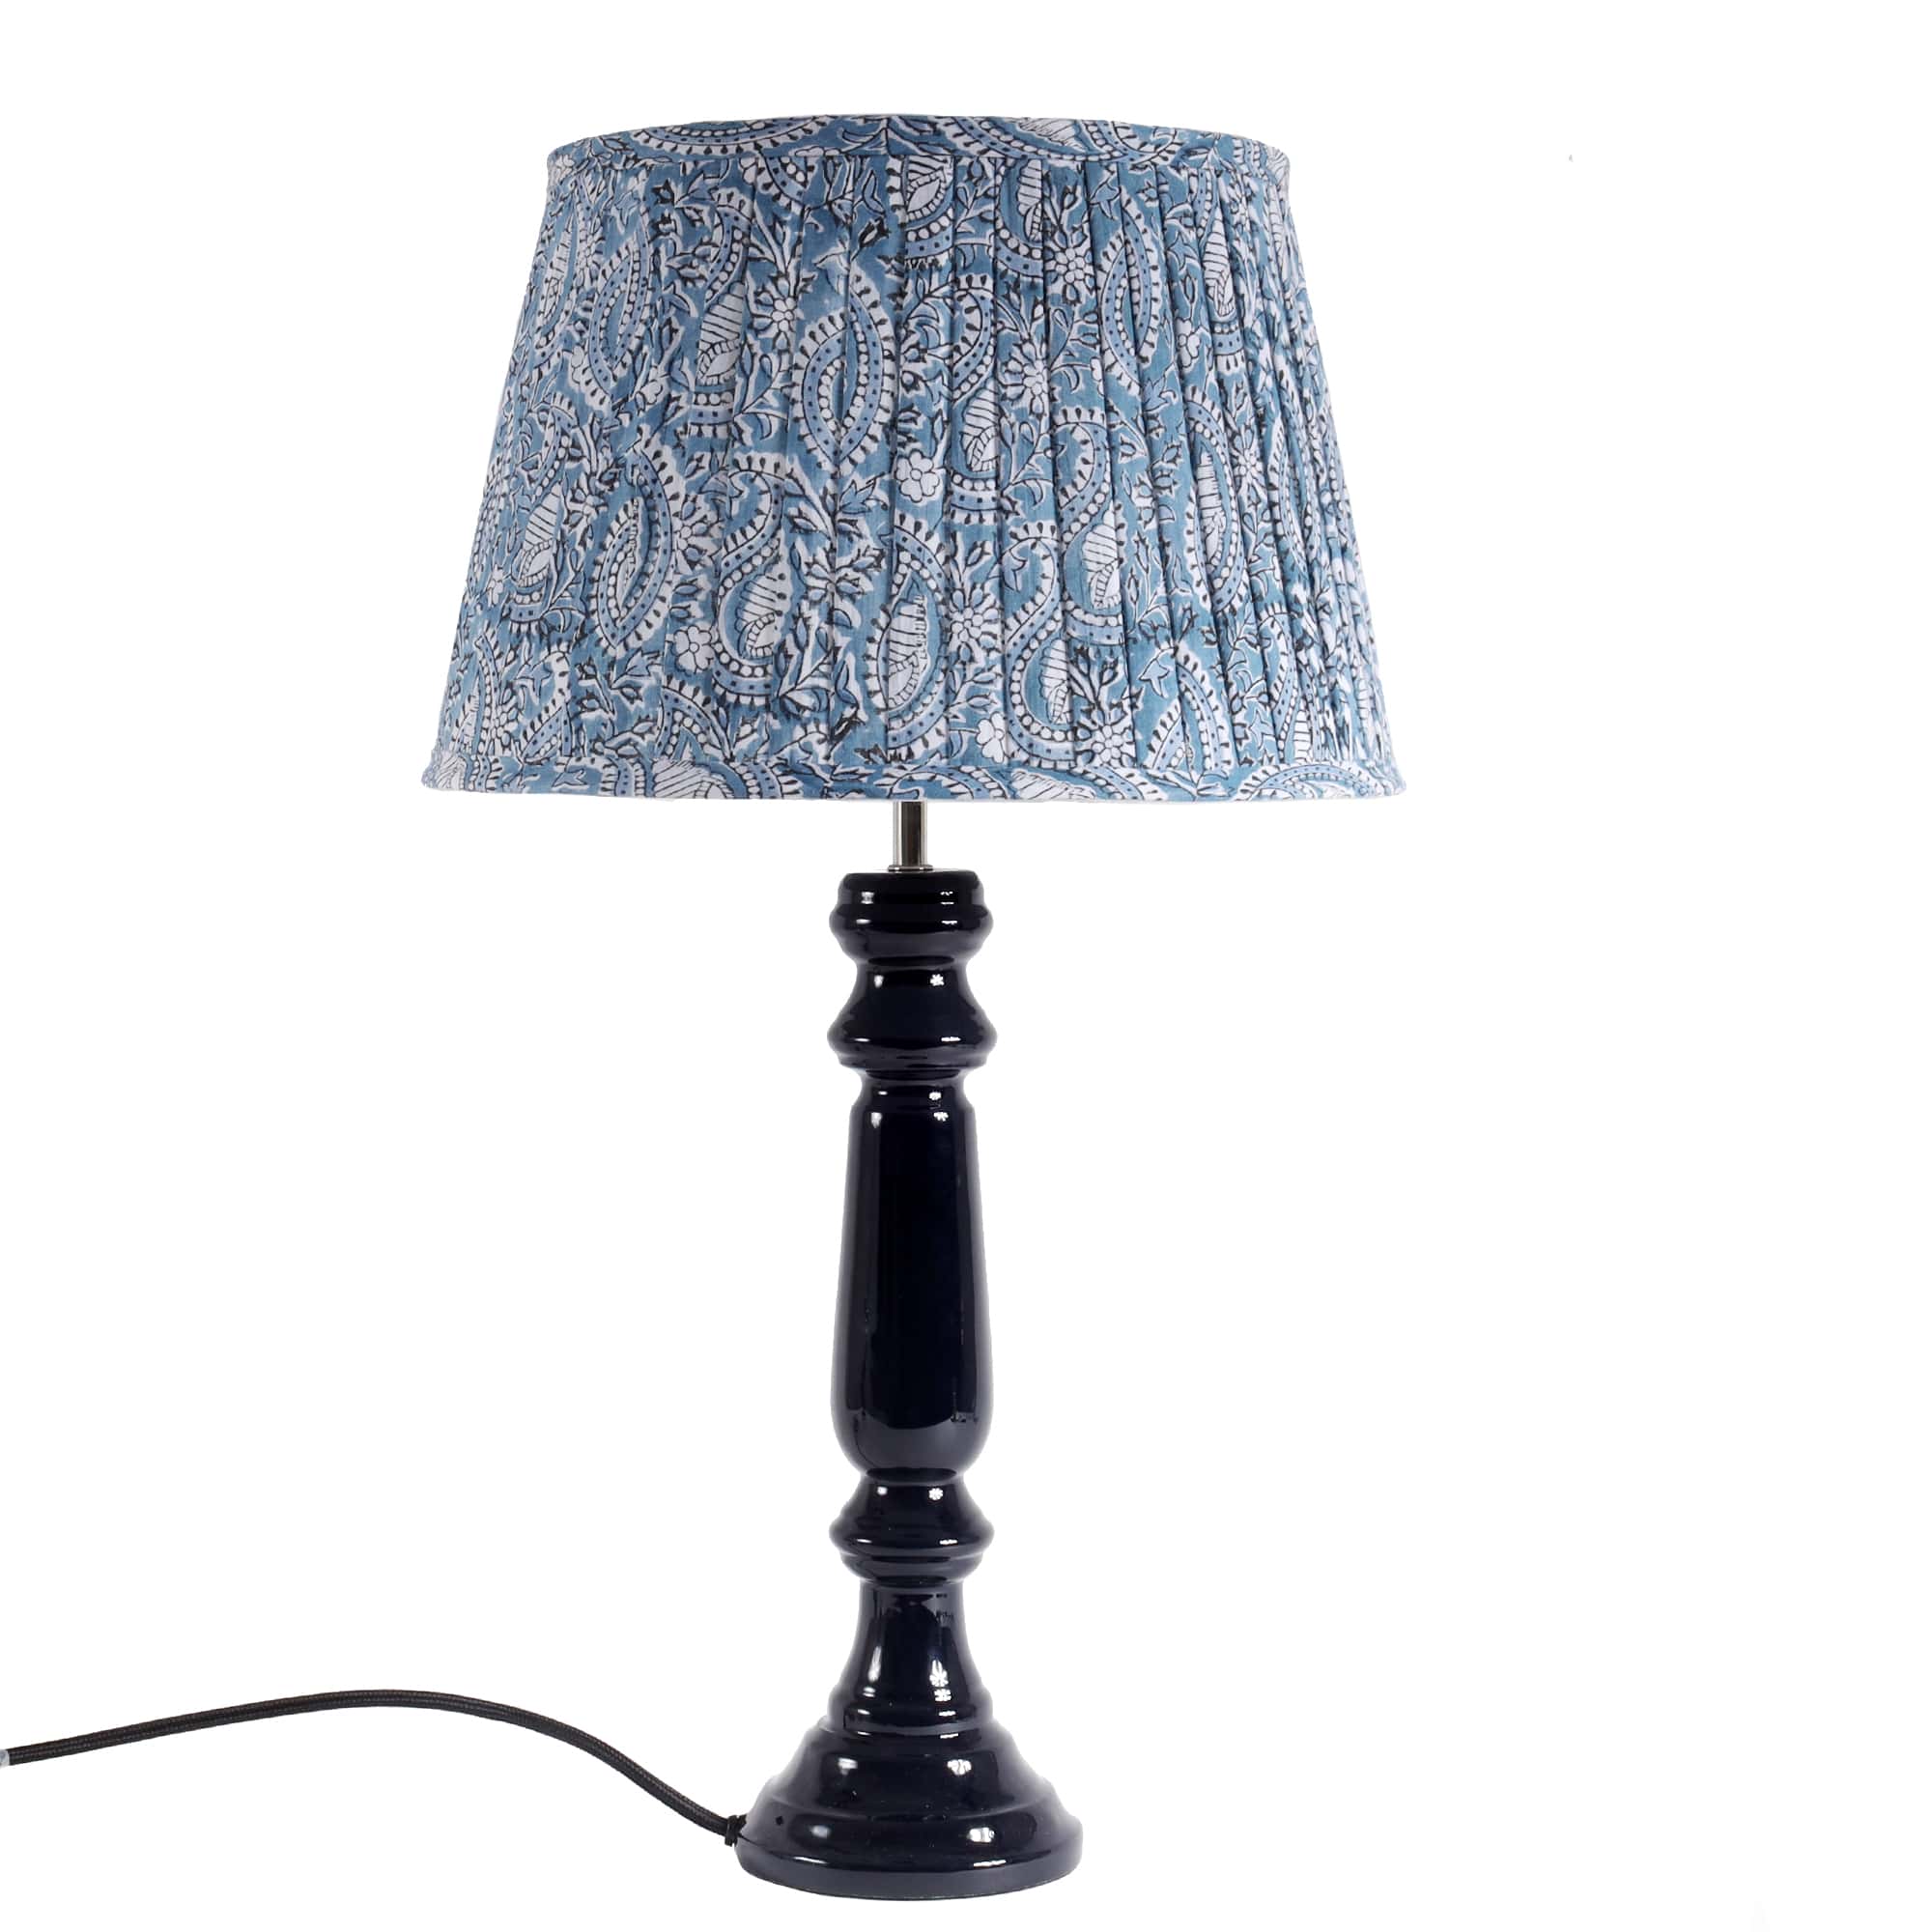 Navy Lacquer Zennor lampbase  with black cord,silver top and black fixing.On top is a pleated lampshade